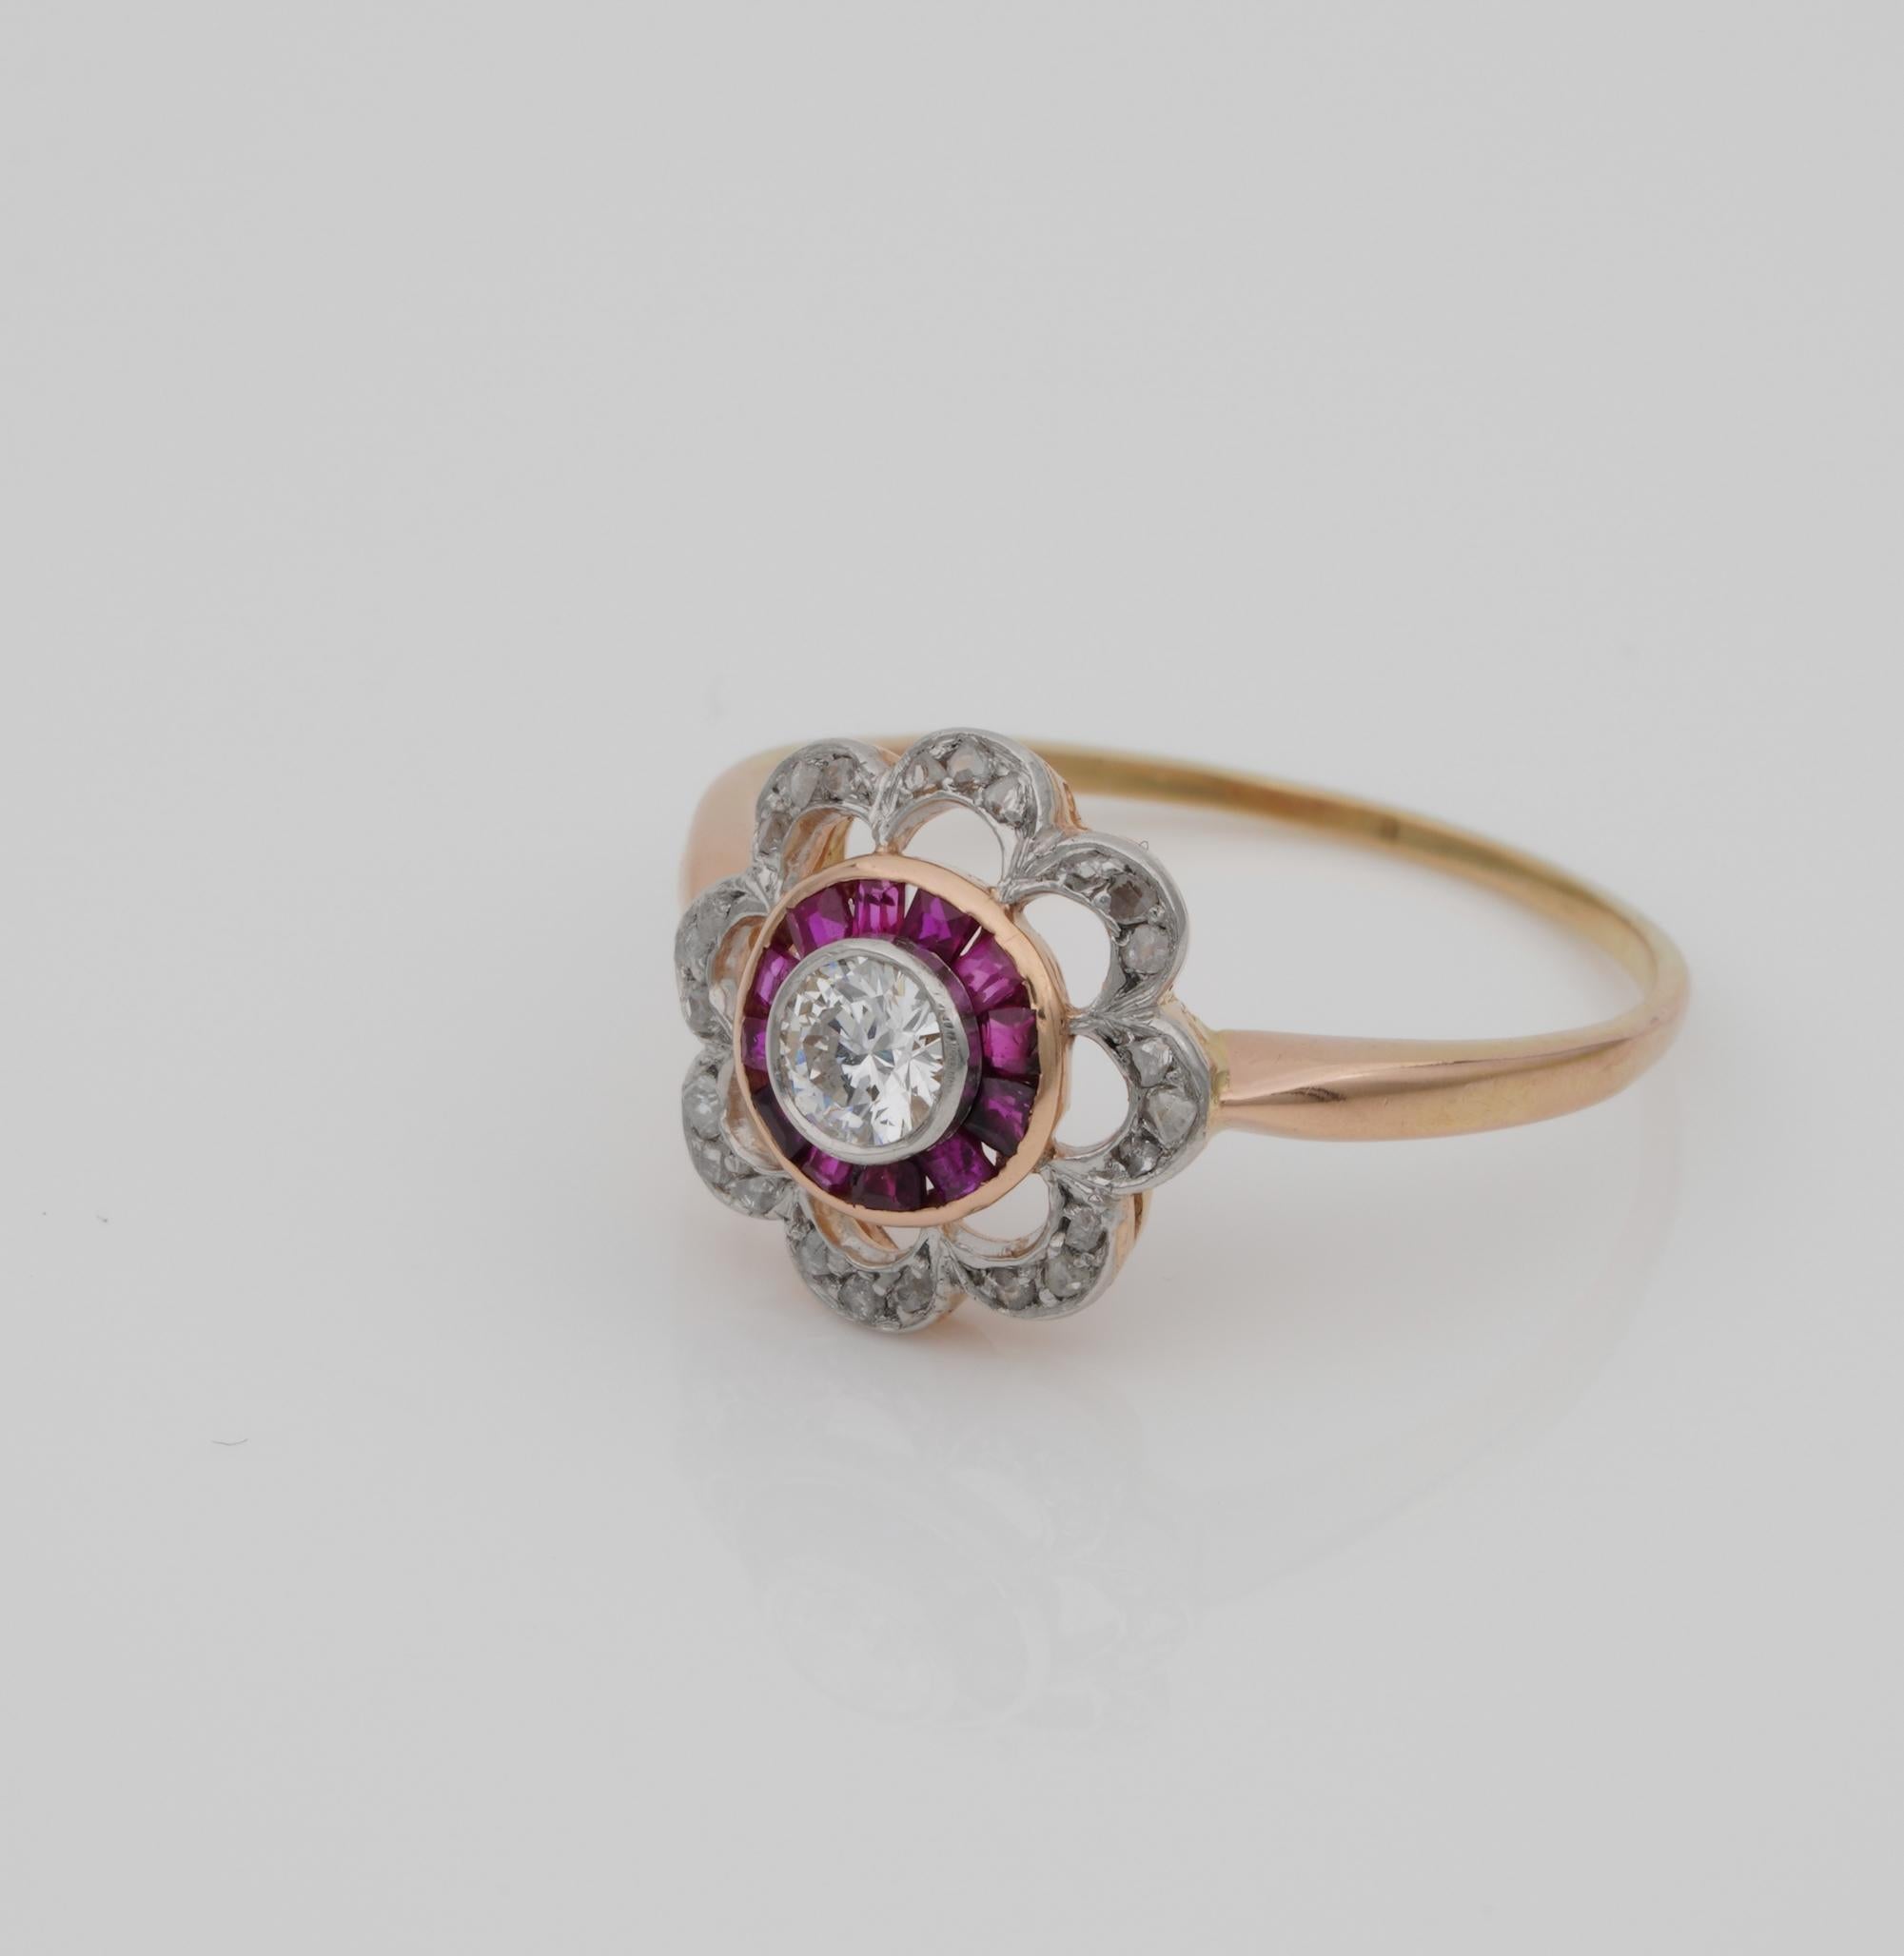 Belle Epoque Diamond Ruby Rare Target Ring, circa 1910 In Good Condition For Sale In Napoli, IT